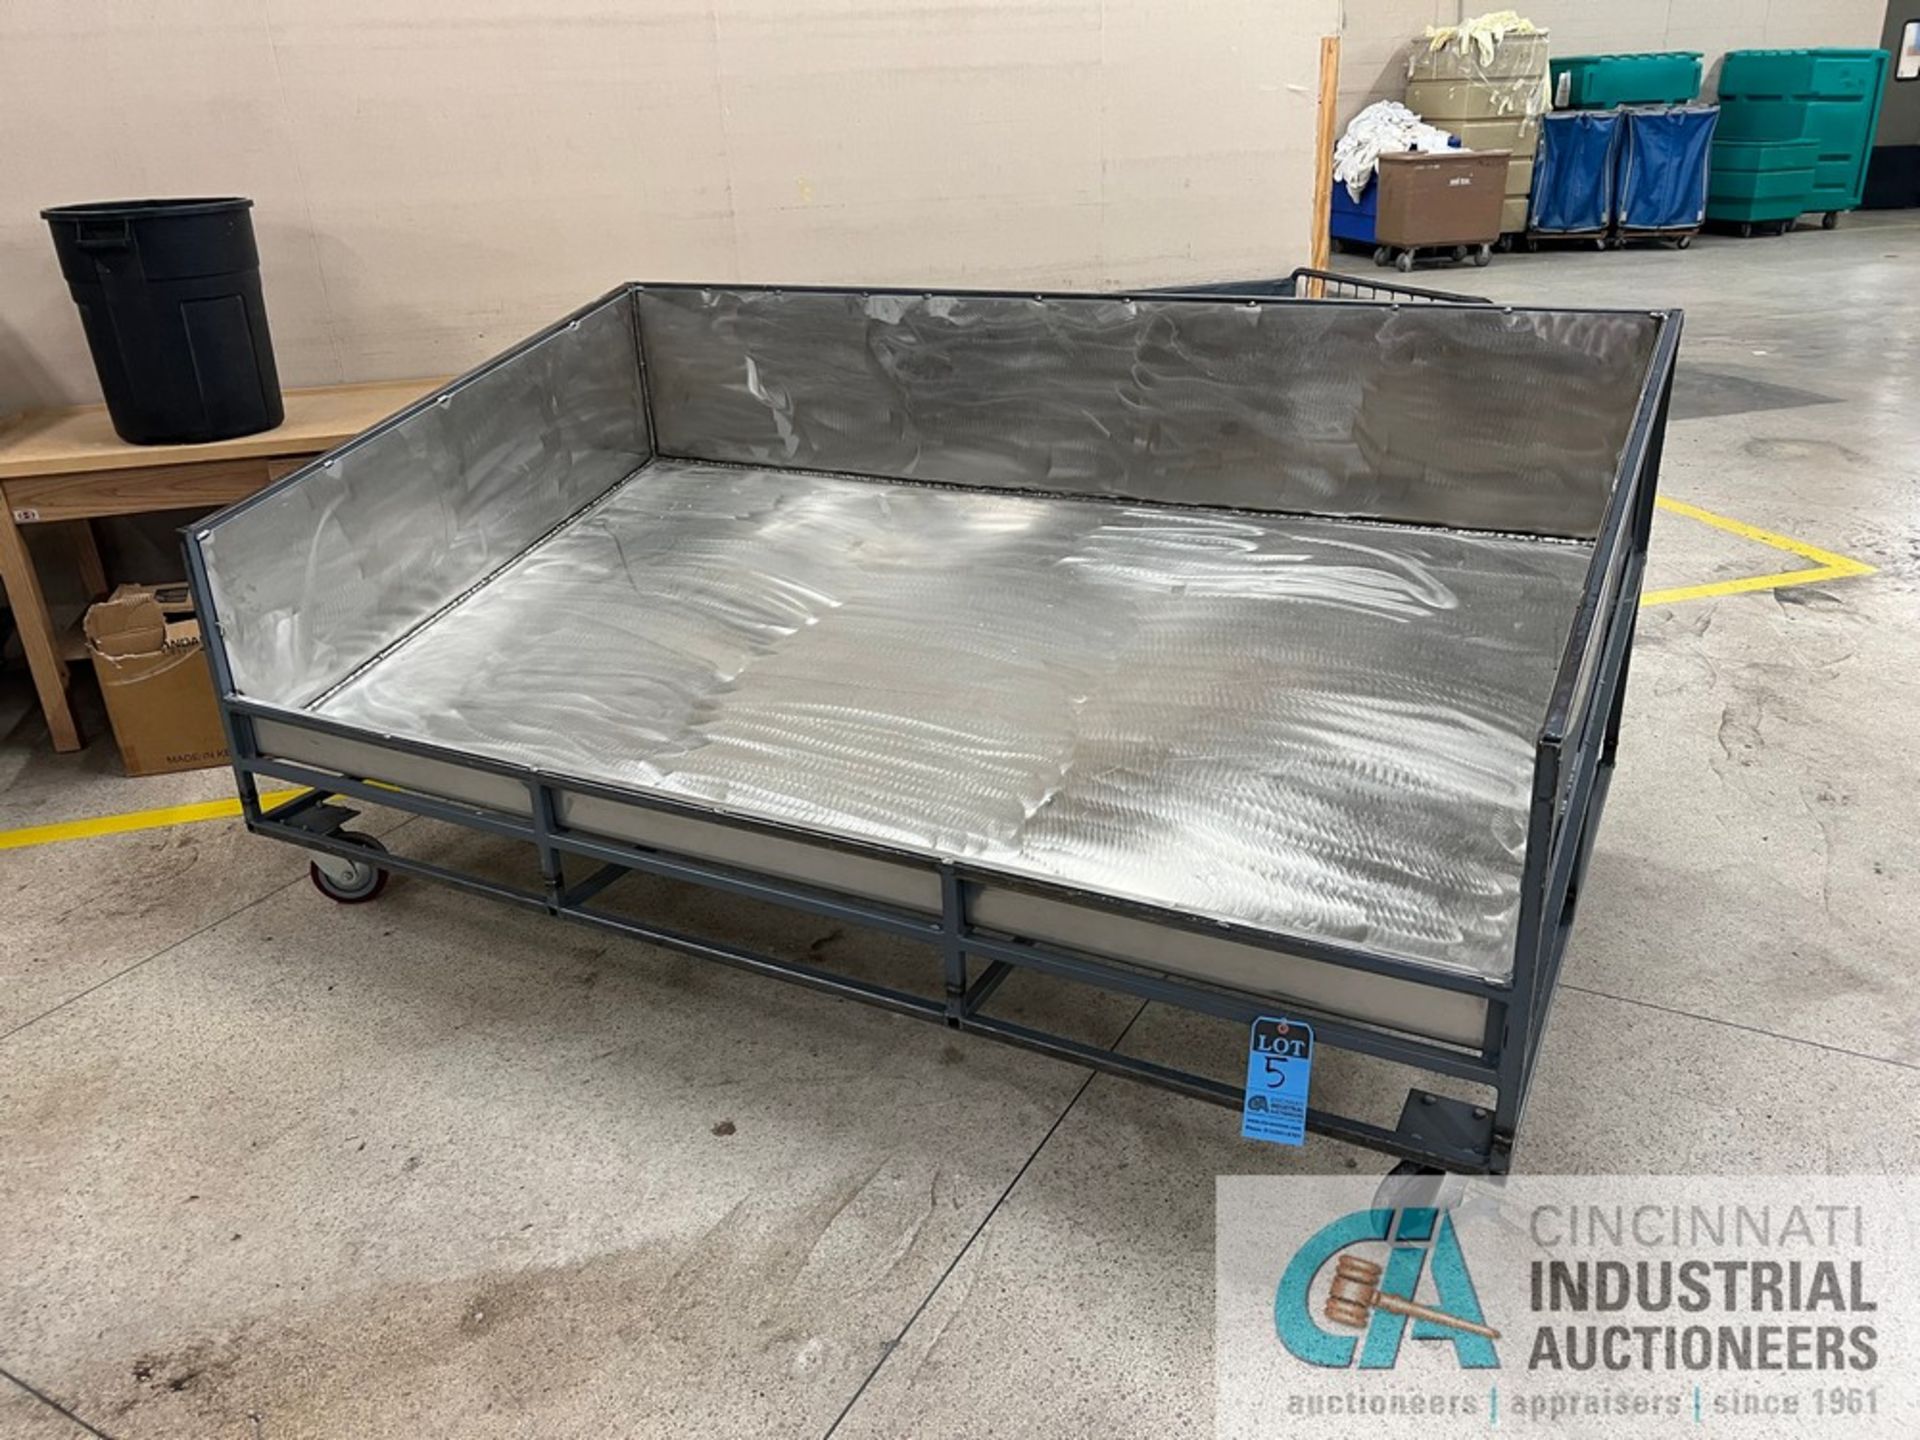 52" X 93" LONG X 17" HIGH STAINLESS STEEL TUB STEEL FRAME SORTING CART, 44" OVERALL HEIGHT